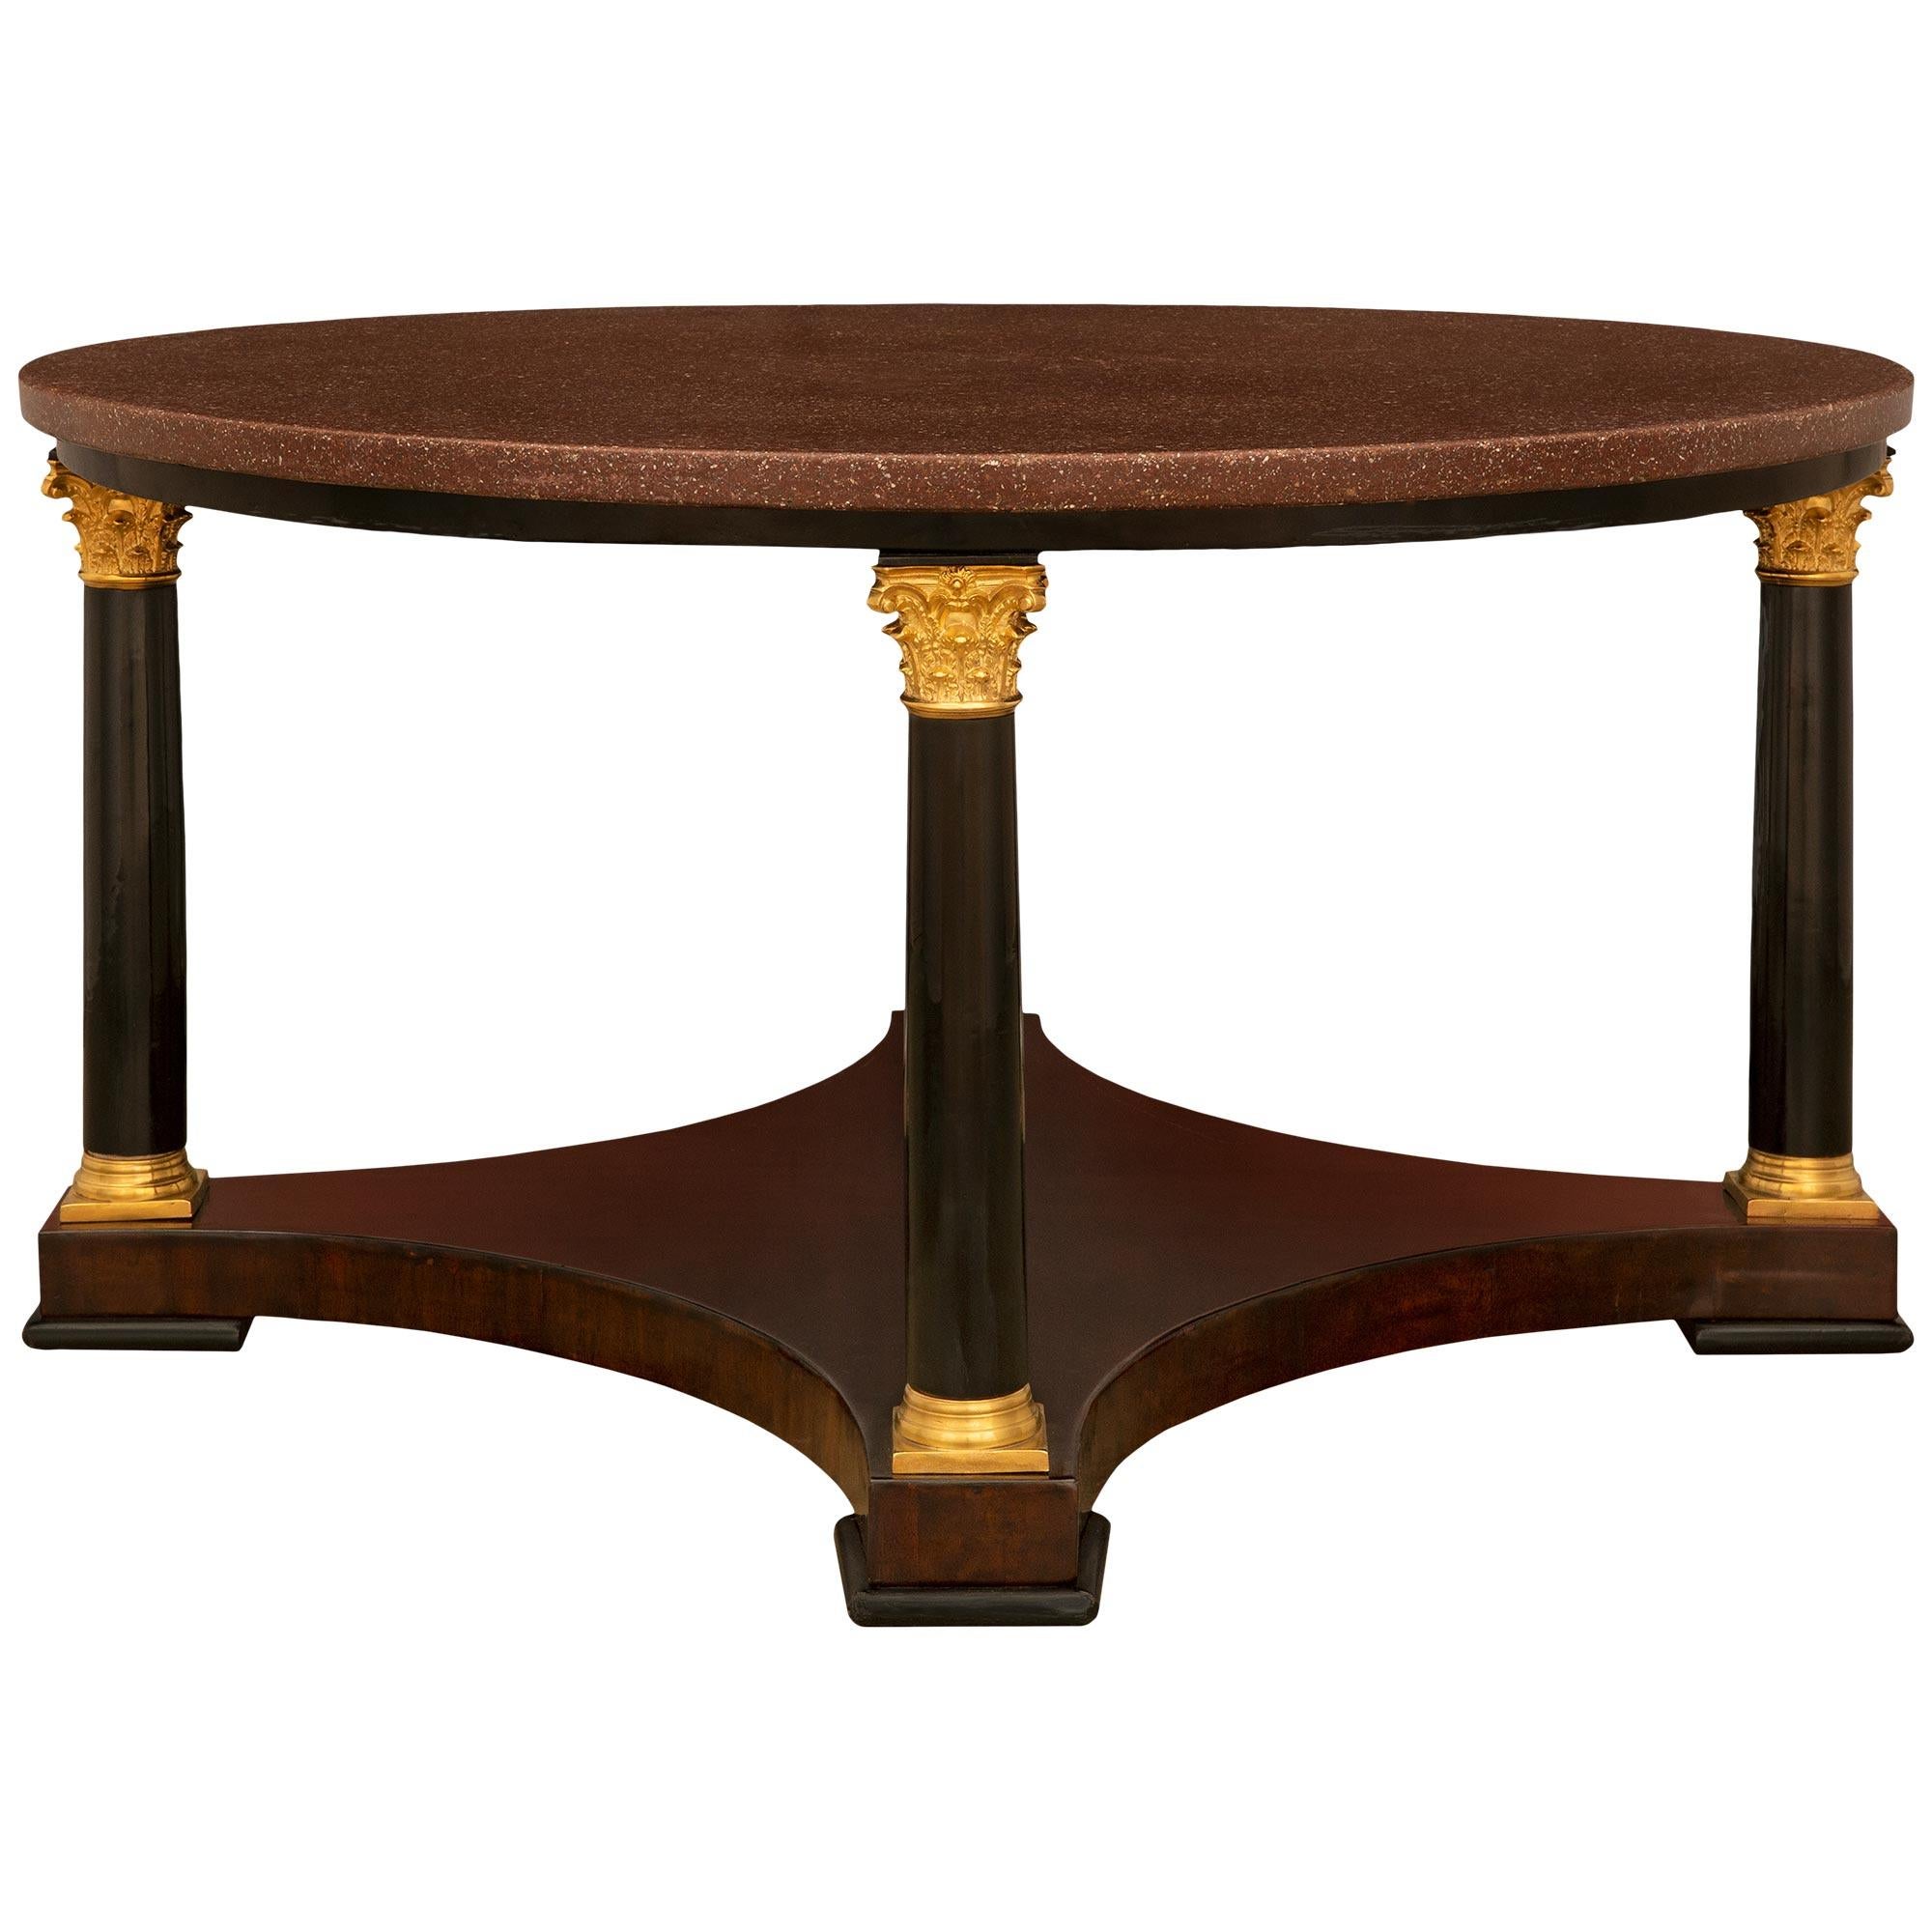 Unknown 19th Century Neoclassical Style Mahogany, Ormolu and Porphyry Coffee Table For Sale